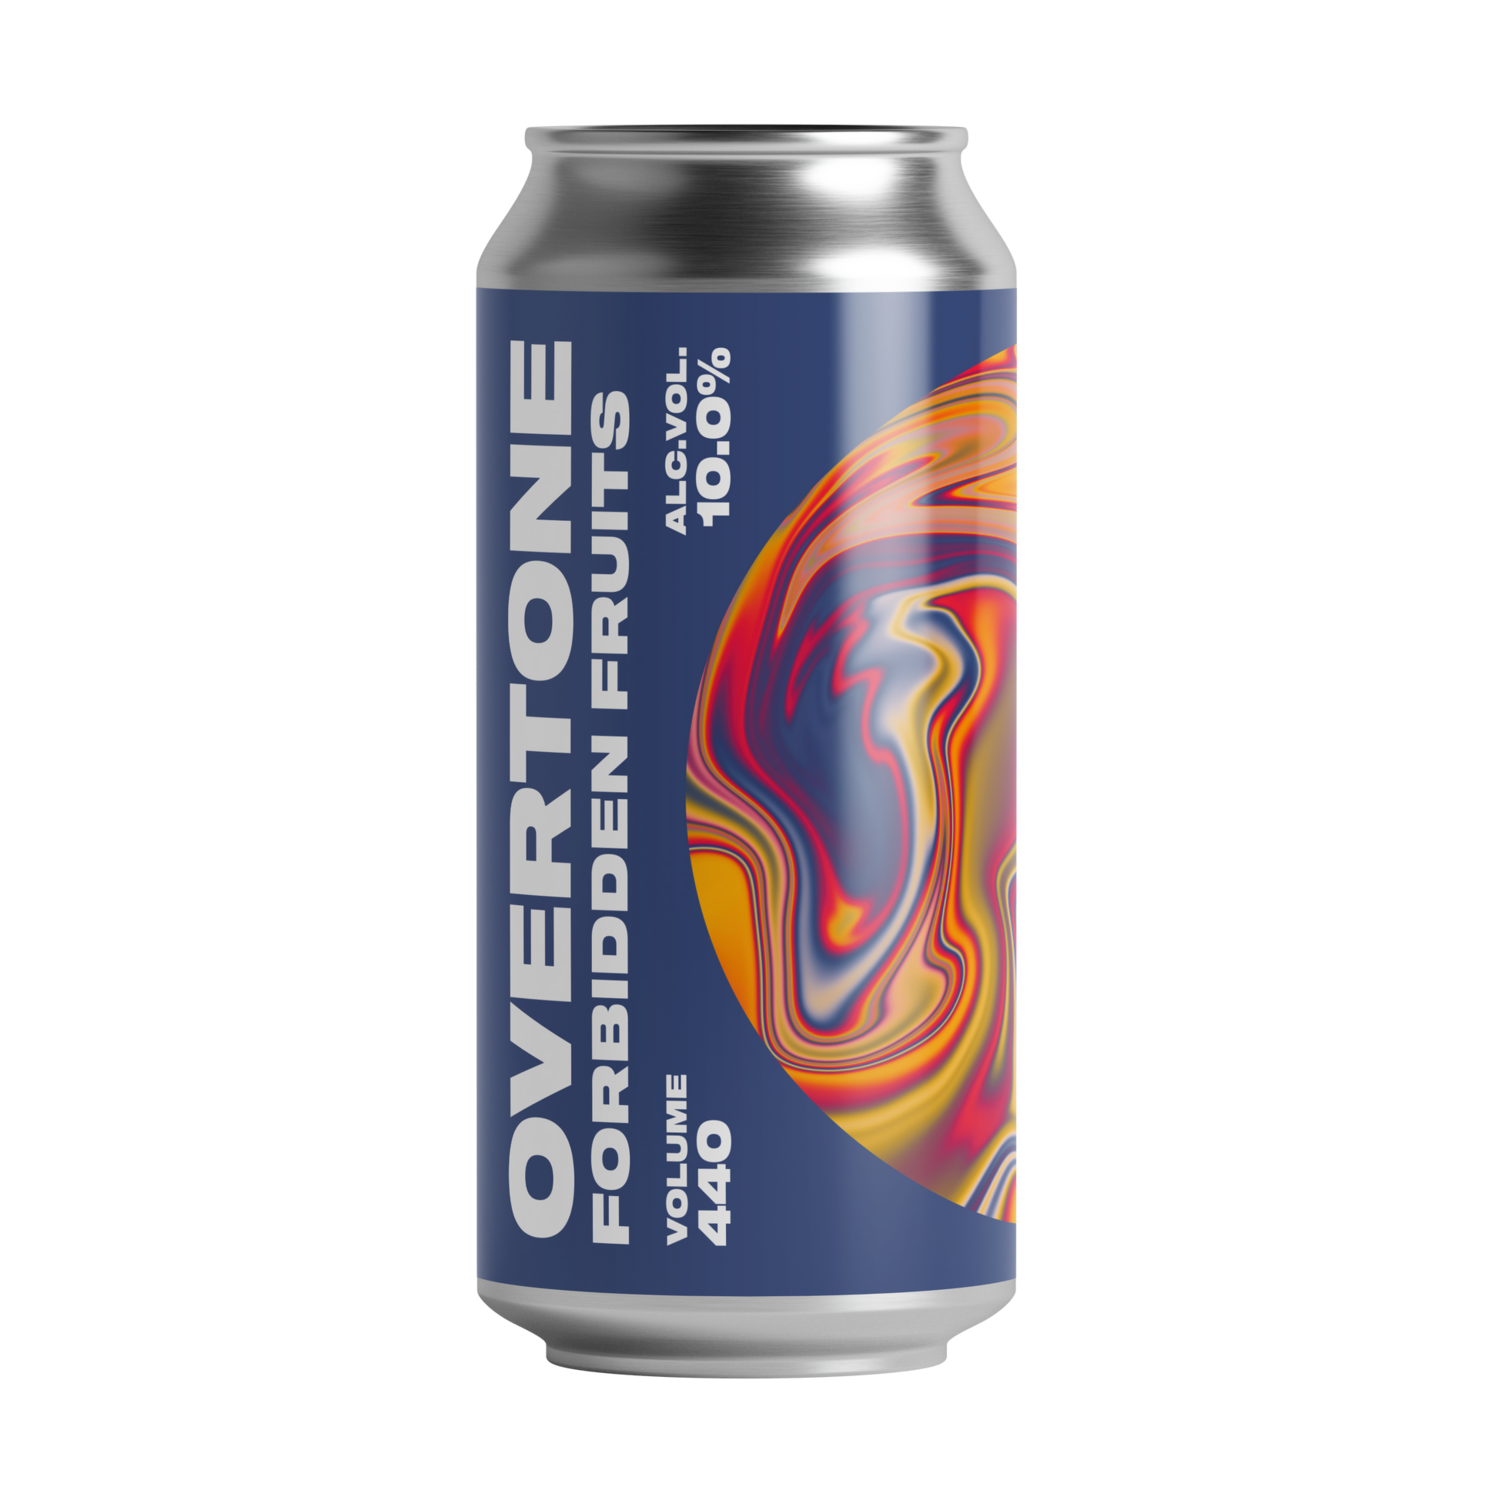 Overtone Forbidden Fruits Imperial Sour